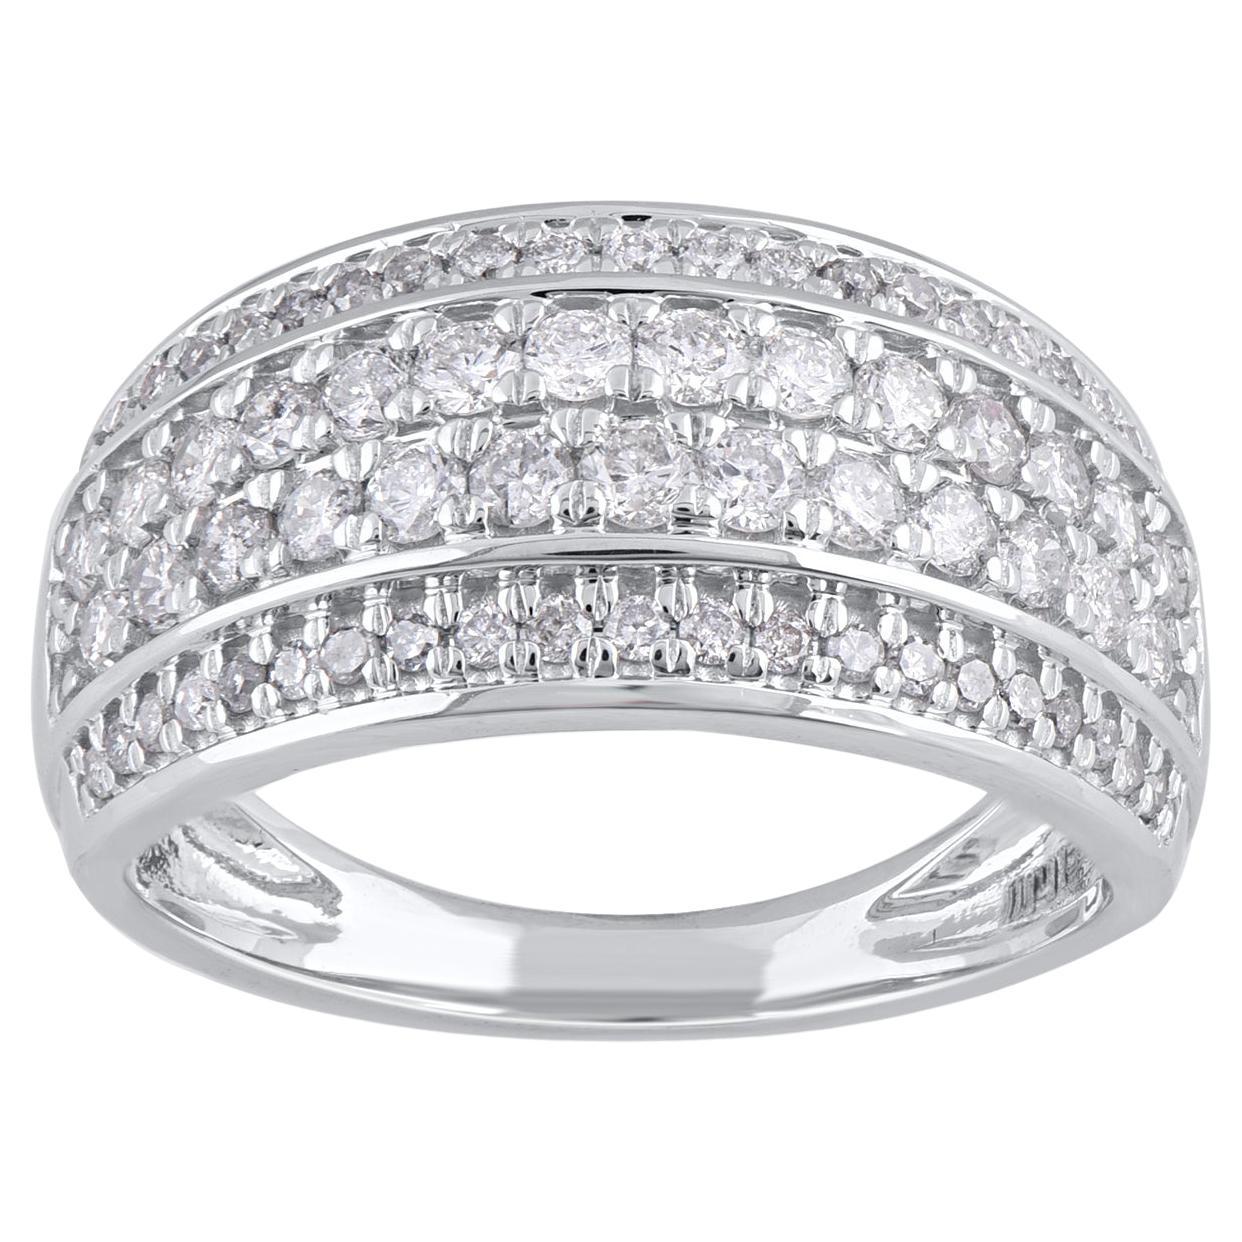 TJD 1.0 Carat Round Diamond 14KT White Gold Multi-Row Wide Band Ring